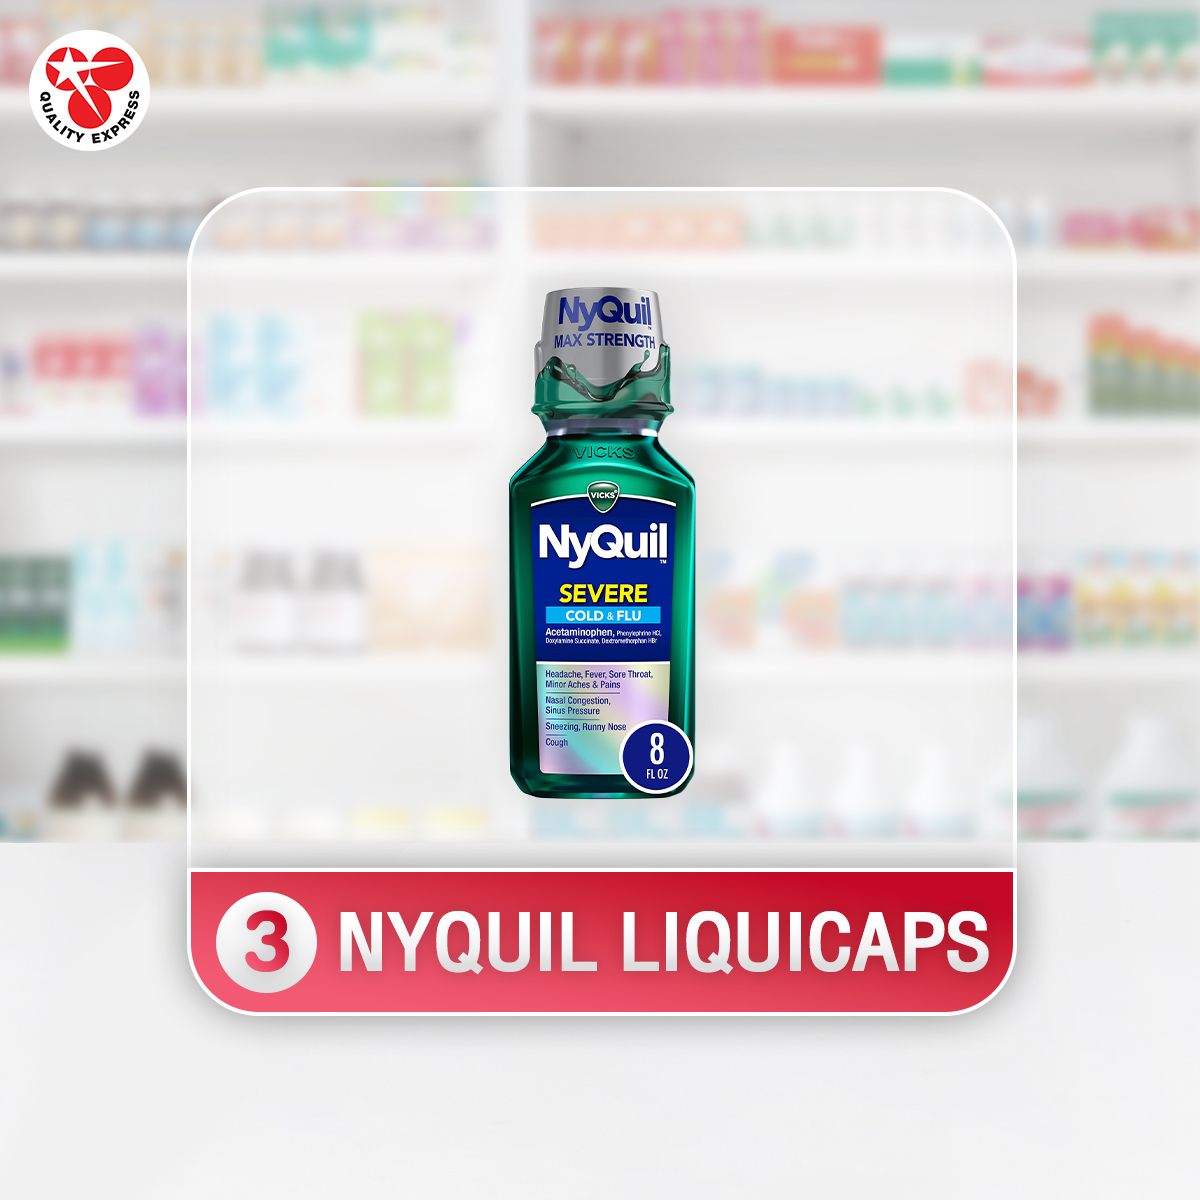 Nyquil Liquicaps